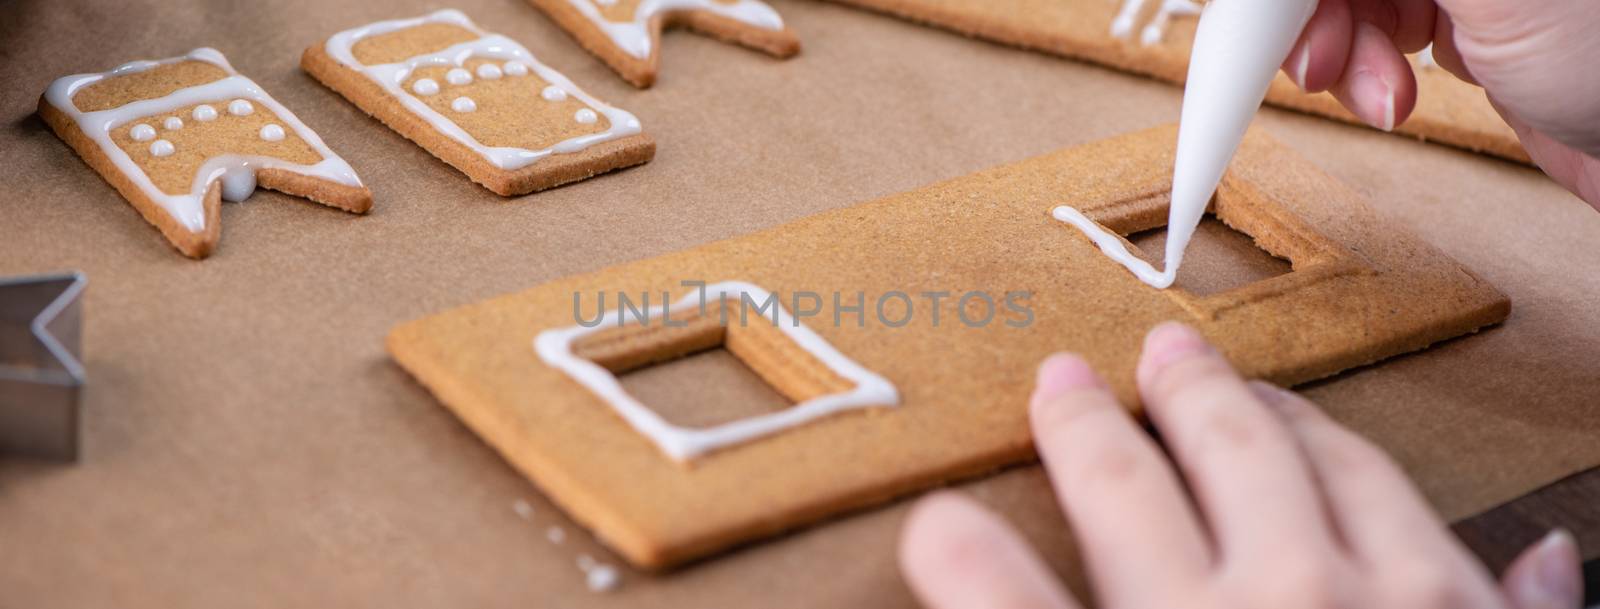 Young woman is decorating Christmas Gingerbread House cookies biscuit at home with frosting topping in icing bag, close up, lifestyle.